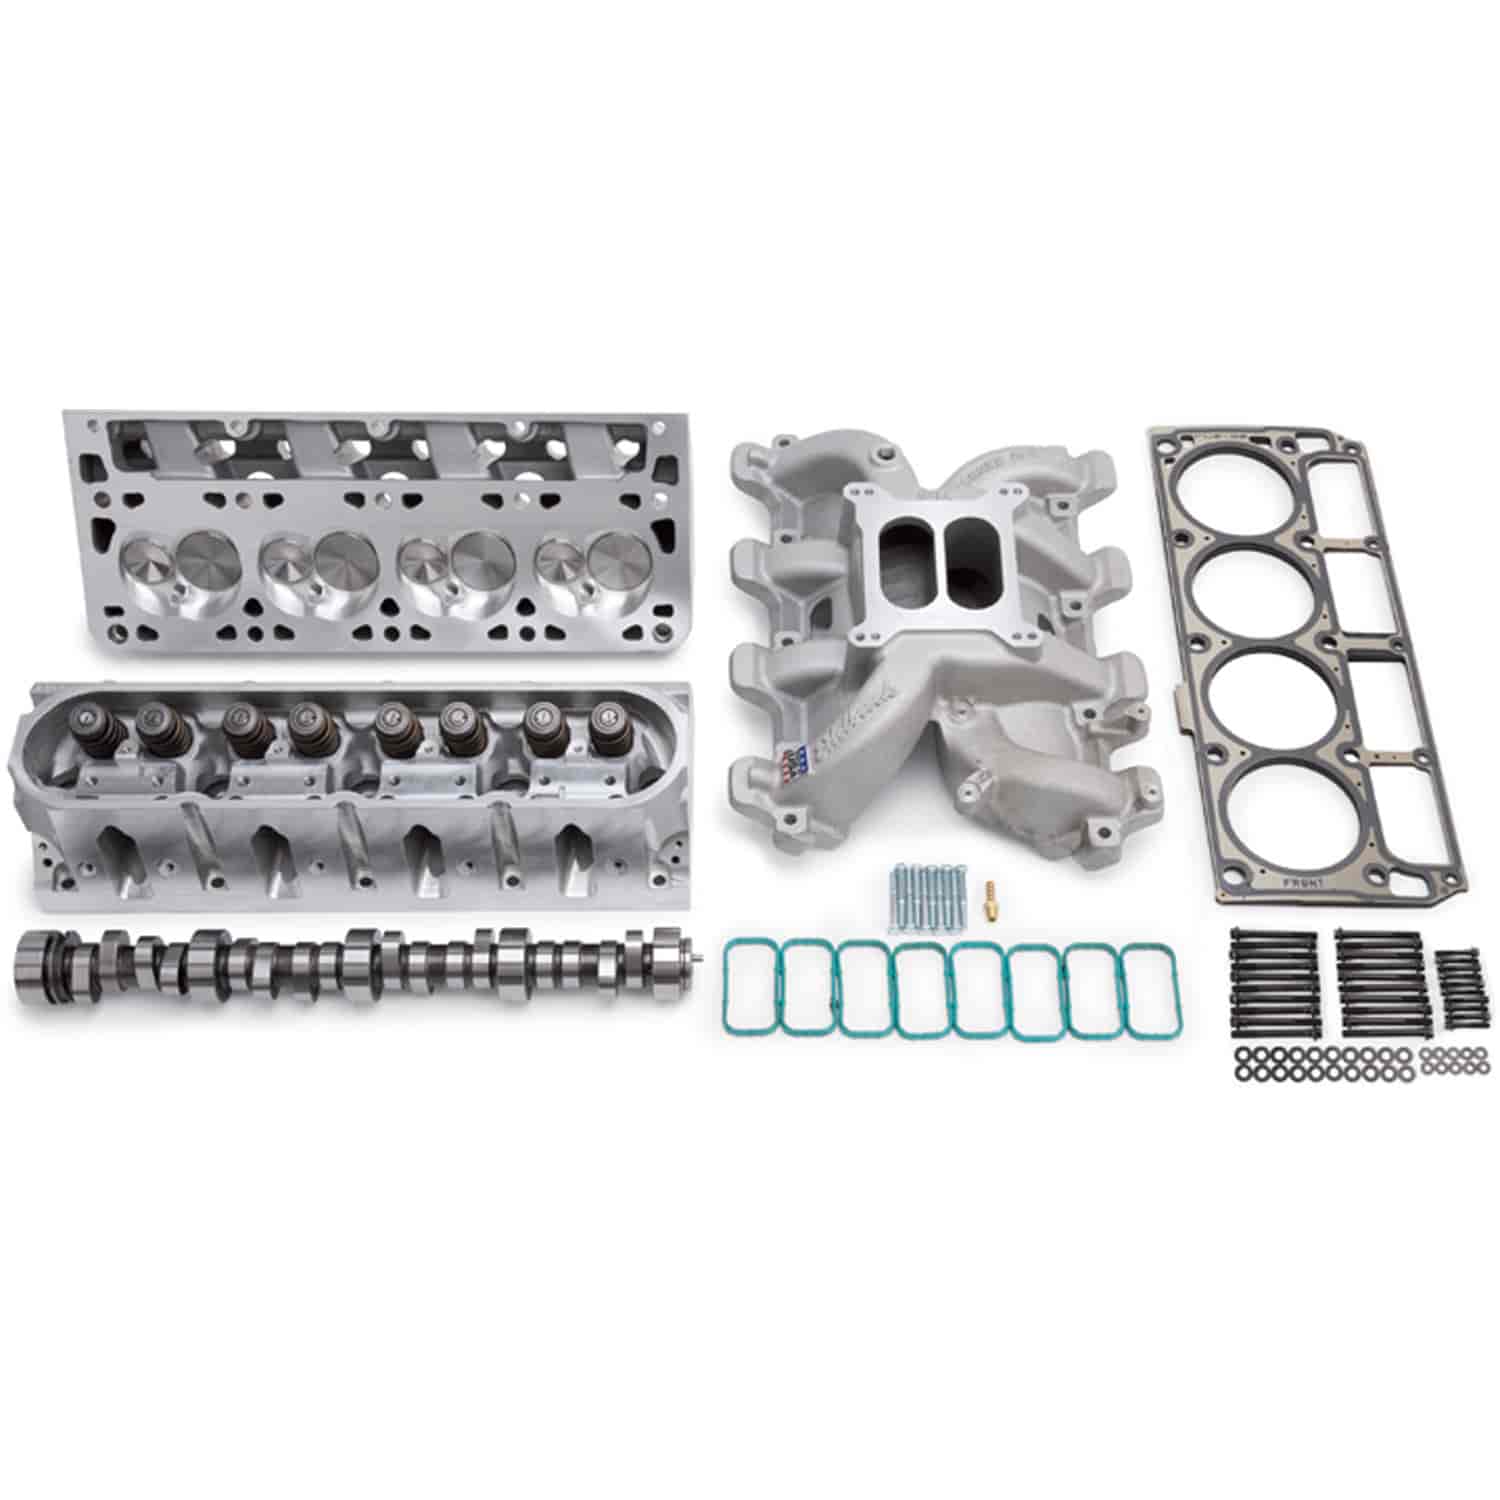 RPM Power Package Top End Kit 2004-Later 6.0L